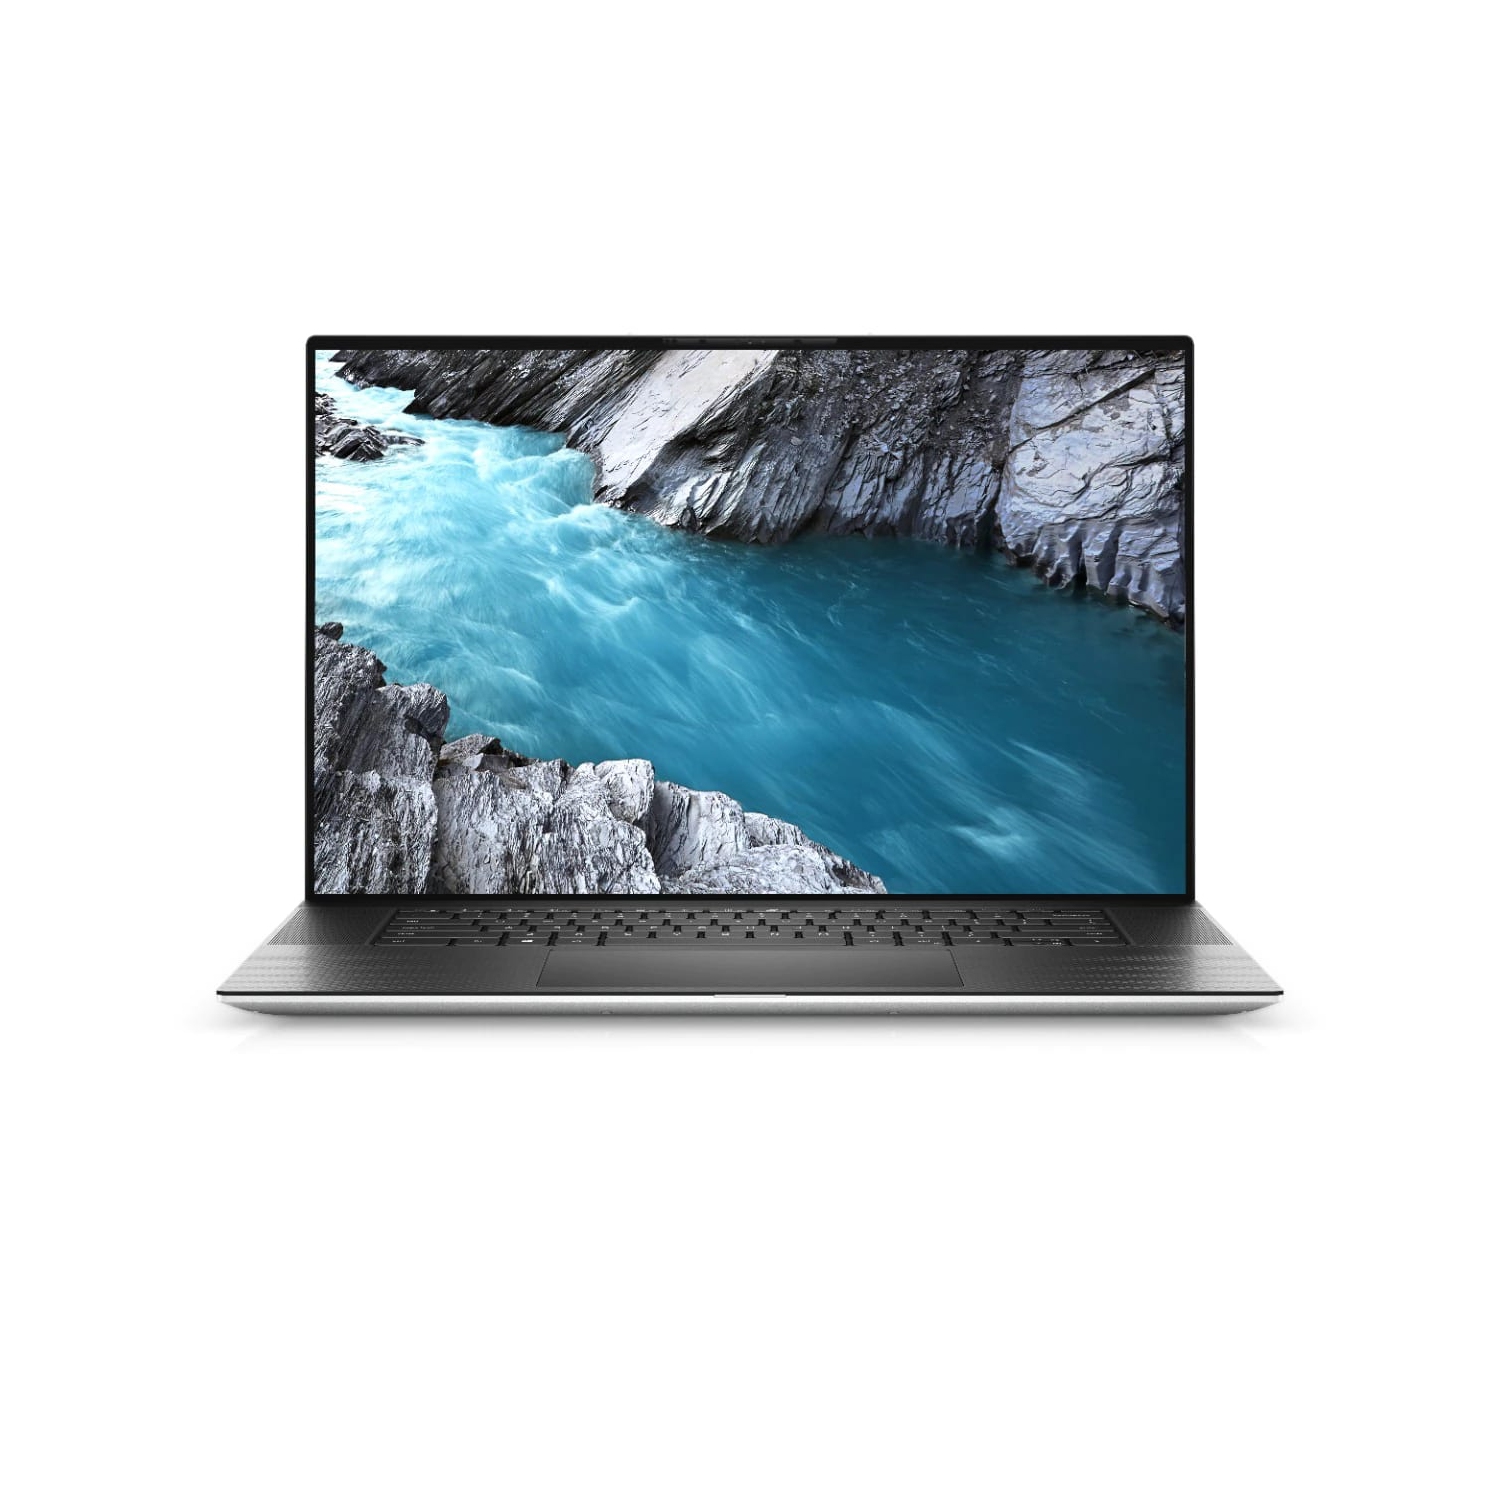 Refurbished (Excellent) - Dell XPS 17 9700 Laptop (2020), 17" 4K Touch, Core i9 - 512GB SSD - 32GB RAM - RTX 2060, 8 Cores @ 5.3 GHz - 10th Gen CPU Certified Refurbished